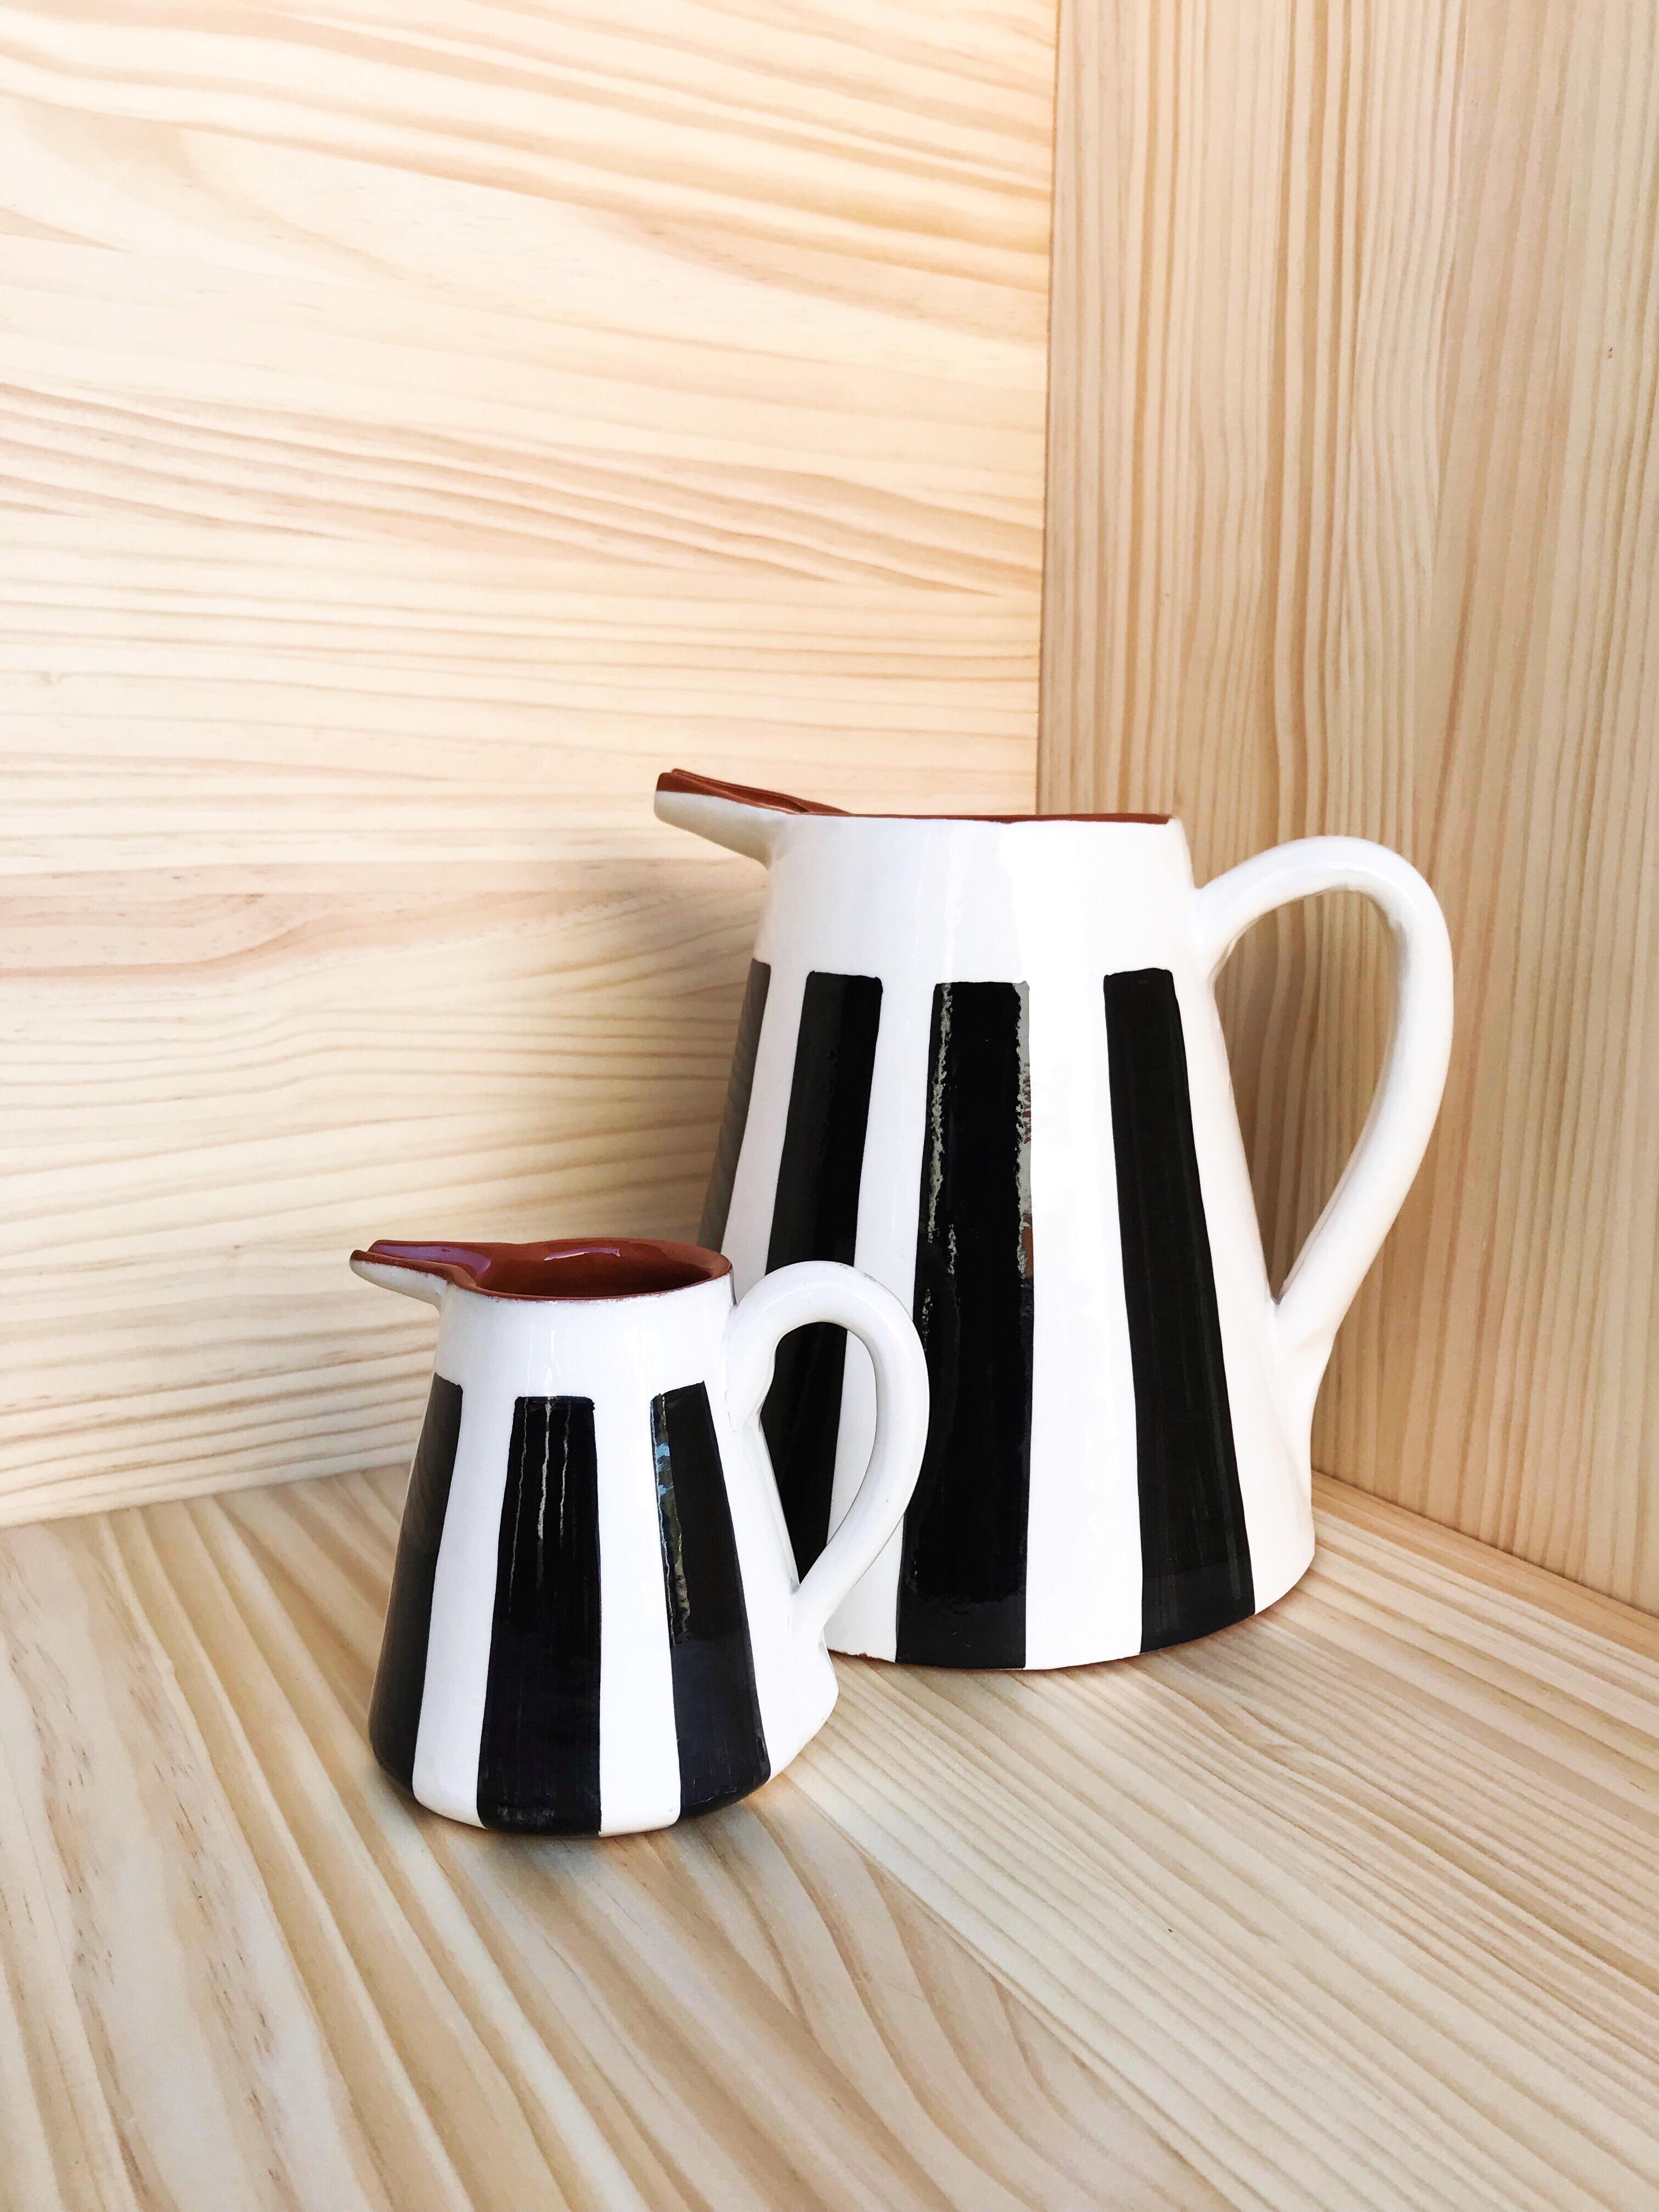 This gorgeous striped terracotta pitcher is the perfect vessel for your next dinner party. Great as a vase for flowers or as a holiday or wedding gift, this jug can hold anything from branches to flowers to mimosas. The bold graphic look blends